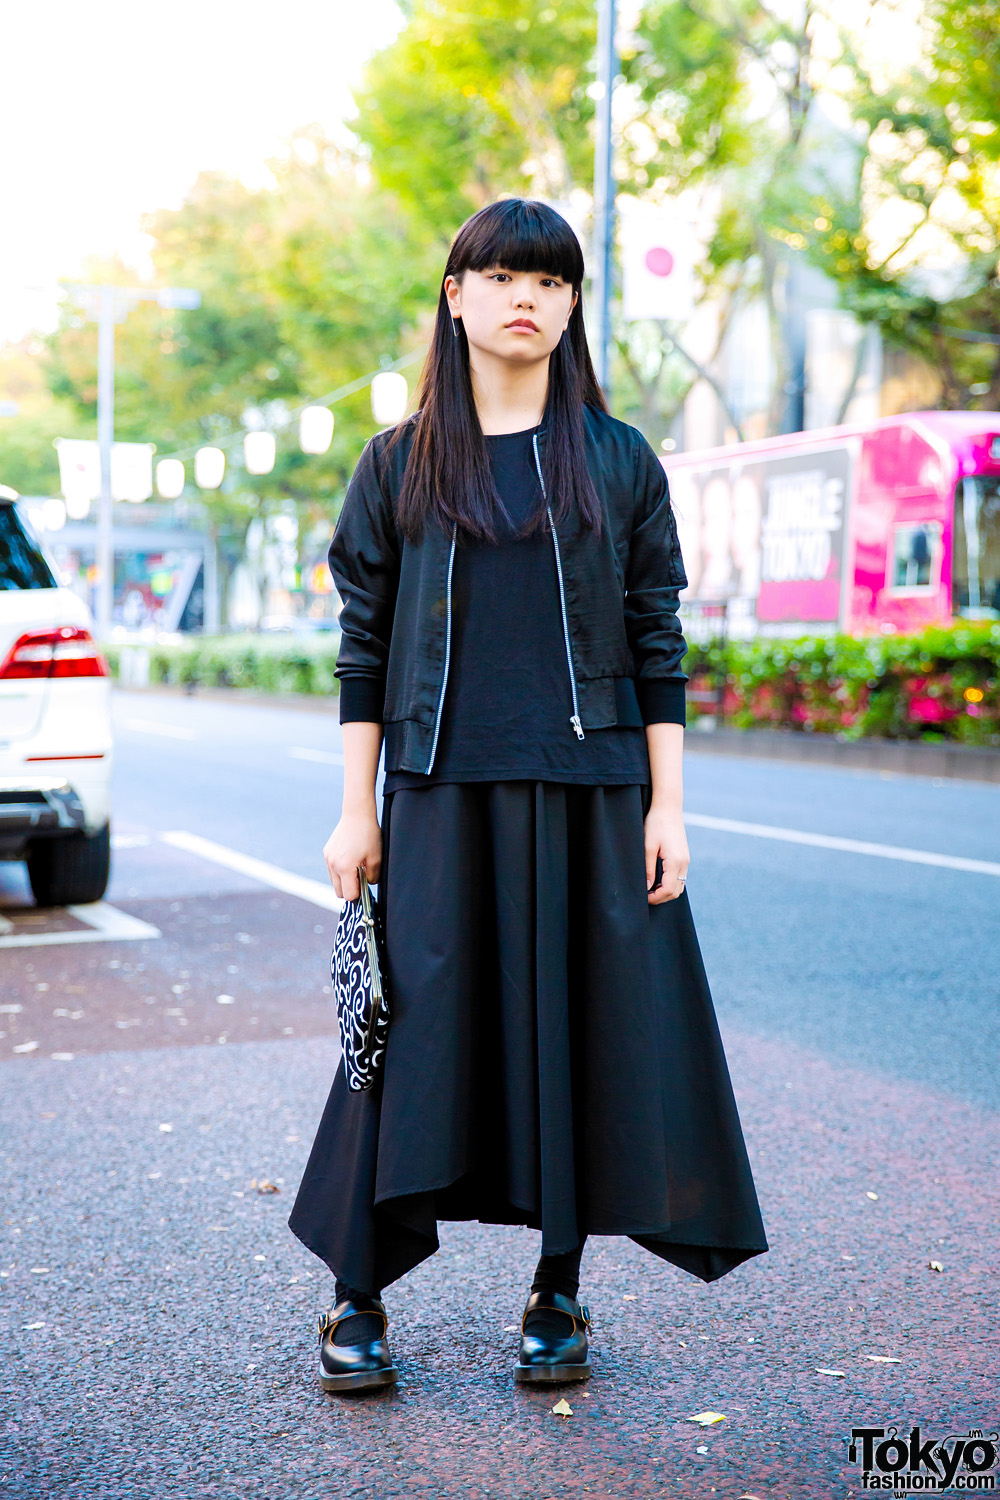 All Black Minimalist Street Style w/ Patterned Clutch, Heather Jacket, Uniqlo Top, Jeanasis Asymmetrical Skirt & Dr. Martens Mary Jane Shoes